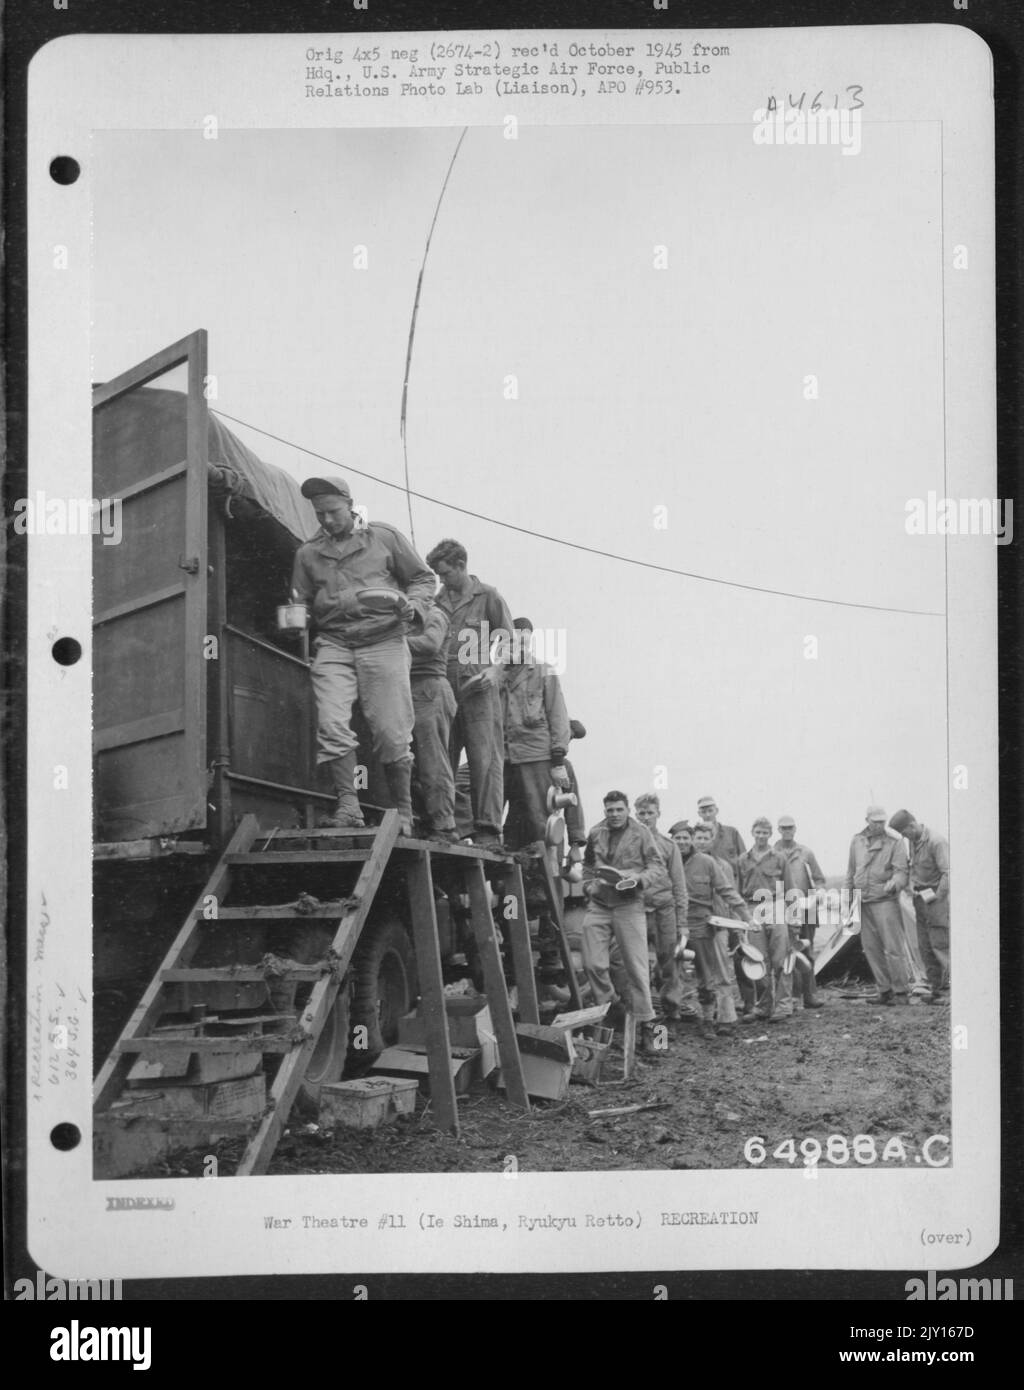 Men Of The 612Th Engineering Squadron, 364Th Service Group, Move Up The Stile-Like Ramp At The Side Of The Chuck Wagon To Get Their Noon Meal. The Menu Included Fried Spam, Green Peas, Meat And Vegetable Stew, Hot Biscuits, Coffee And Canned Pineapple. Stock Photo